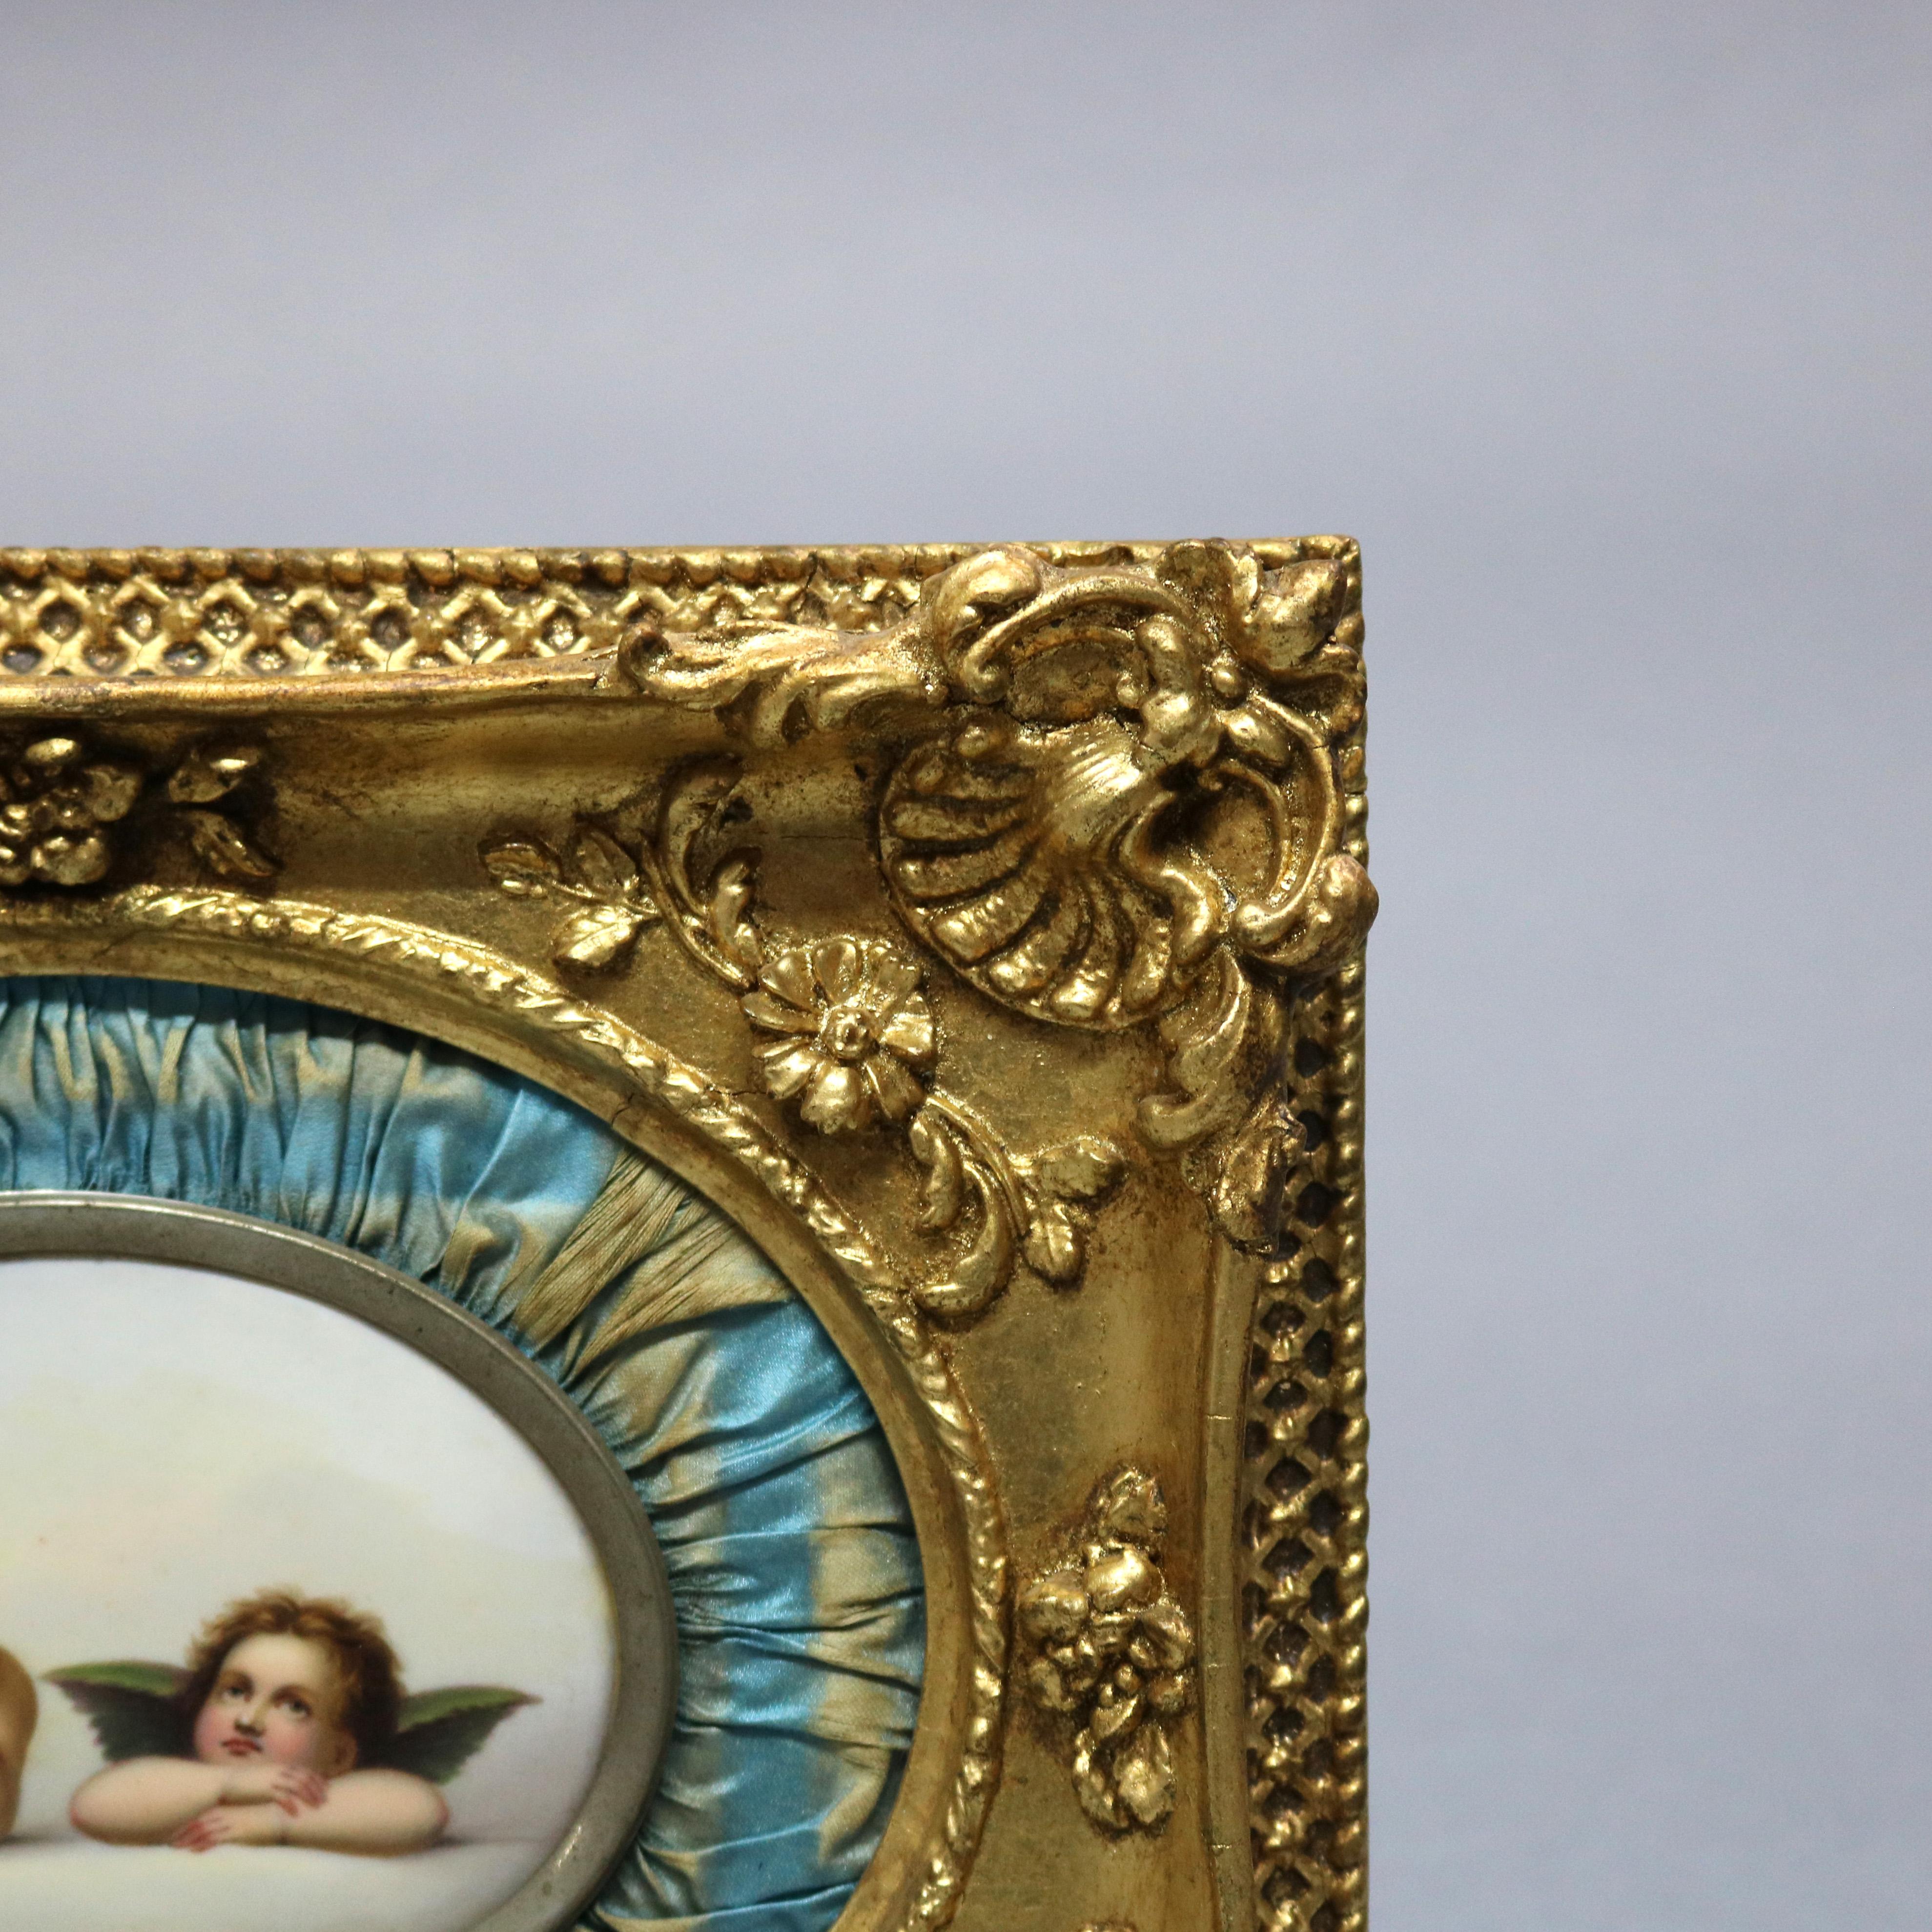 Fired Antique Giltwood Framed Painting on Porcelain KPM School of Winged Cherubs 19thC